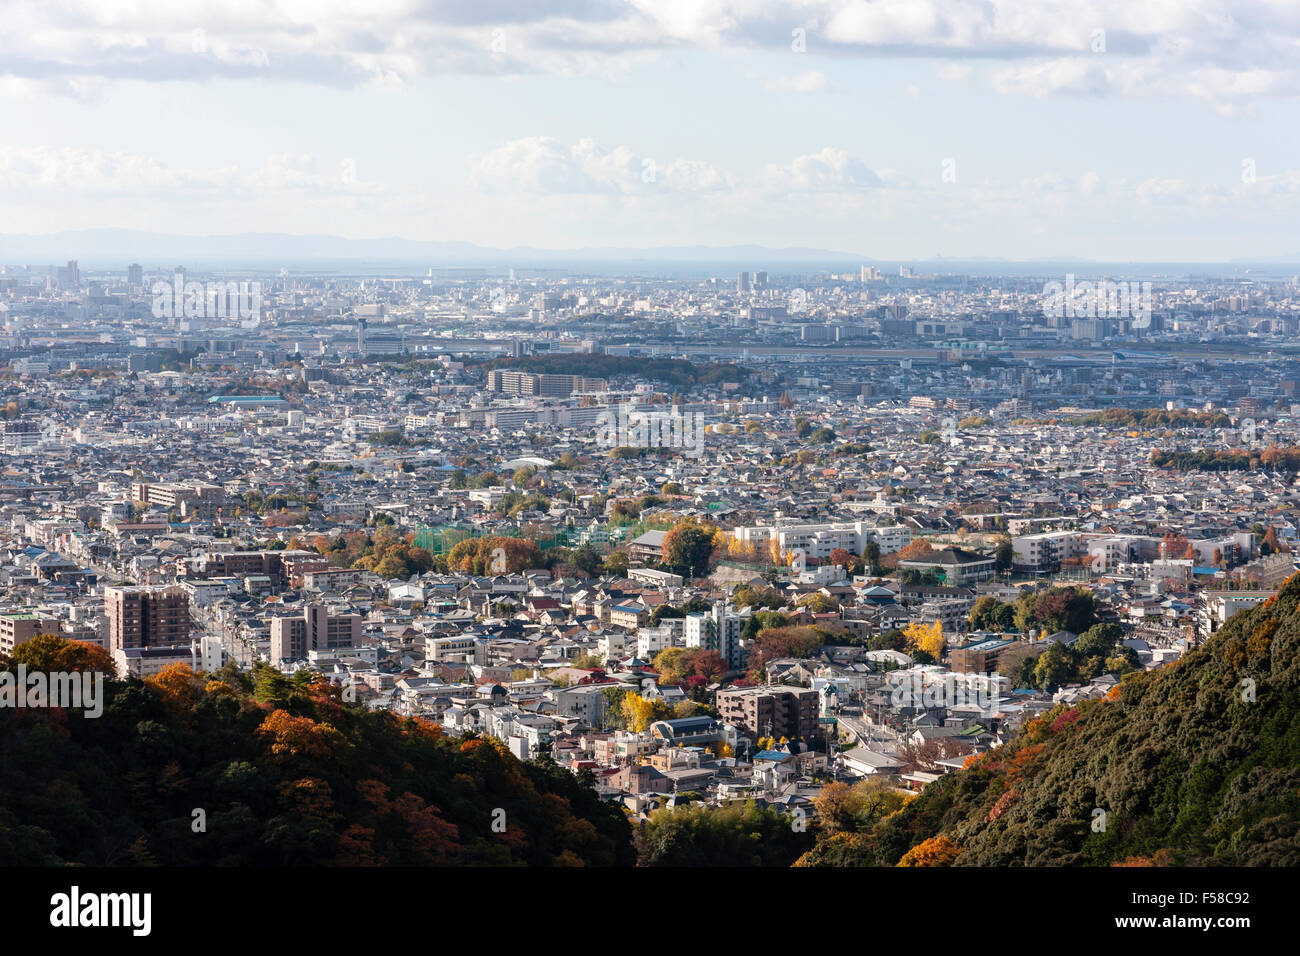 Japan Famous scenic view from mountains at Mino of Osaka city sprawling to the coast with the Yodo river flowing through. Blue sky with clouds. Stock Photo